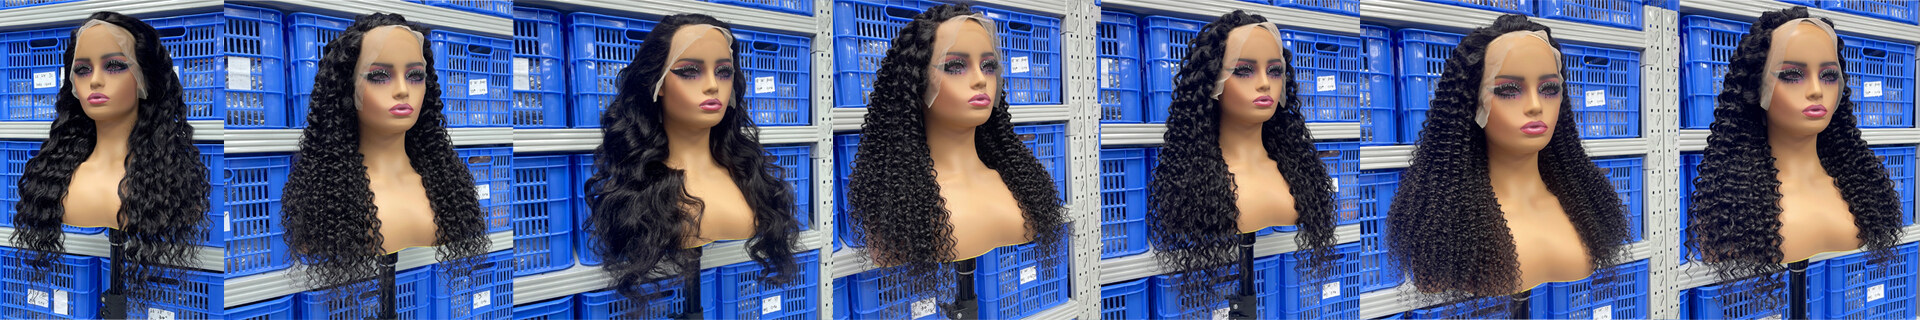 high quality african american wigs, high quality brazilian full lace wigs, high quality wigs for women, buy high quality wigs, buy high quality wigs online